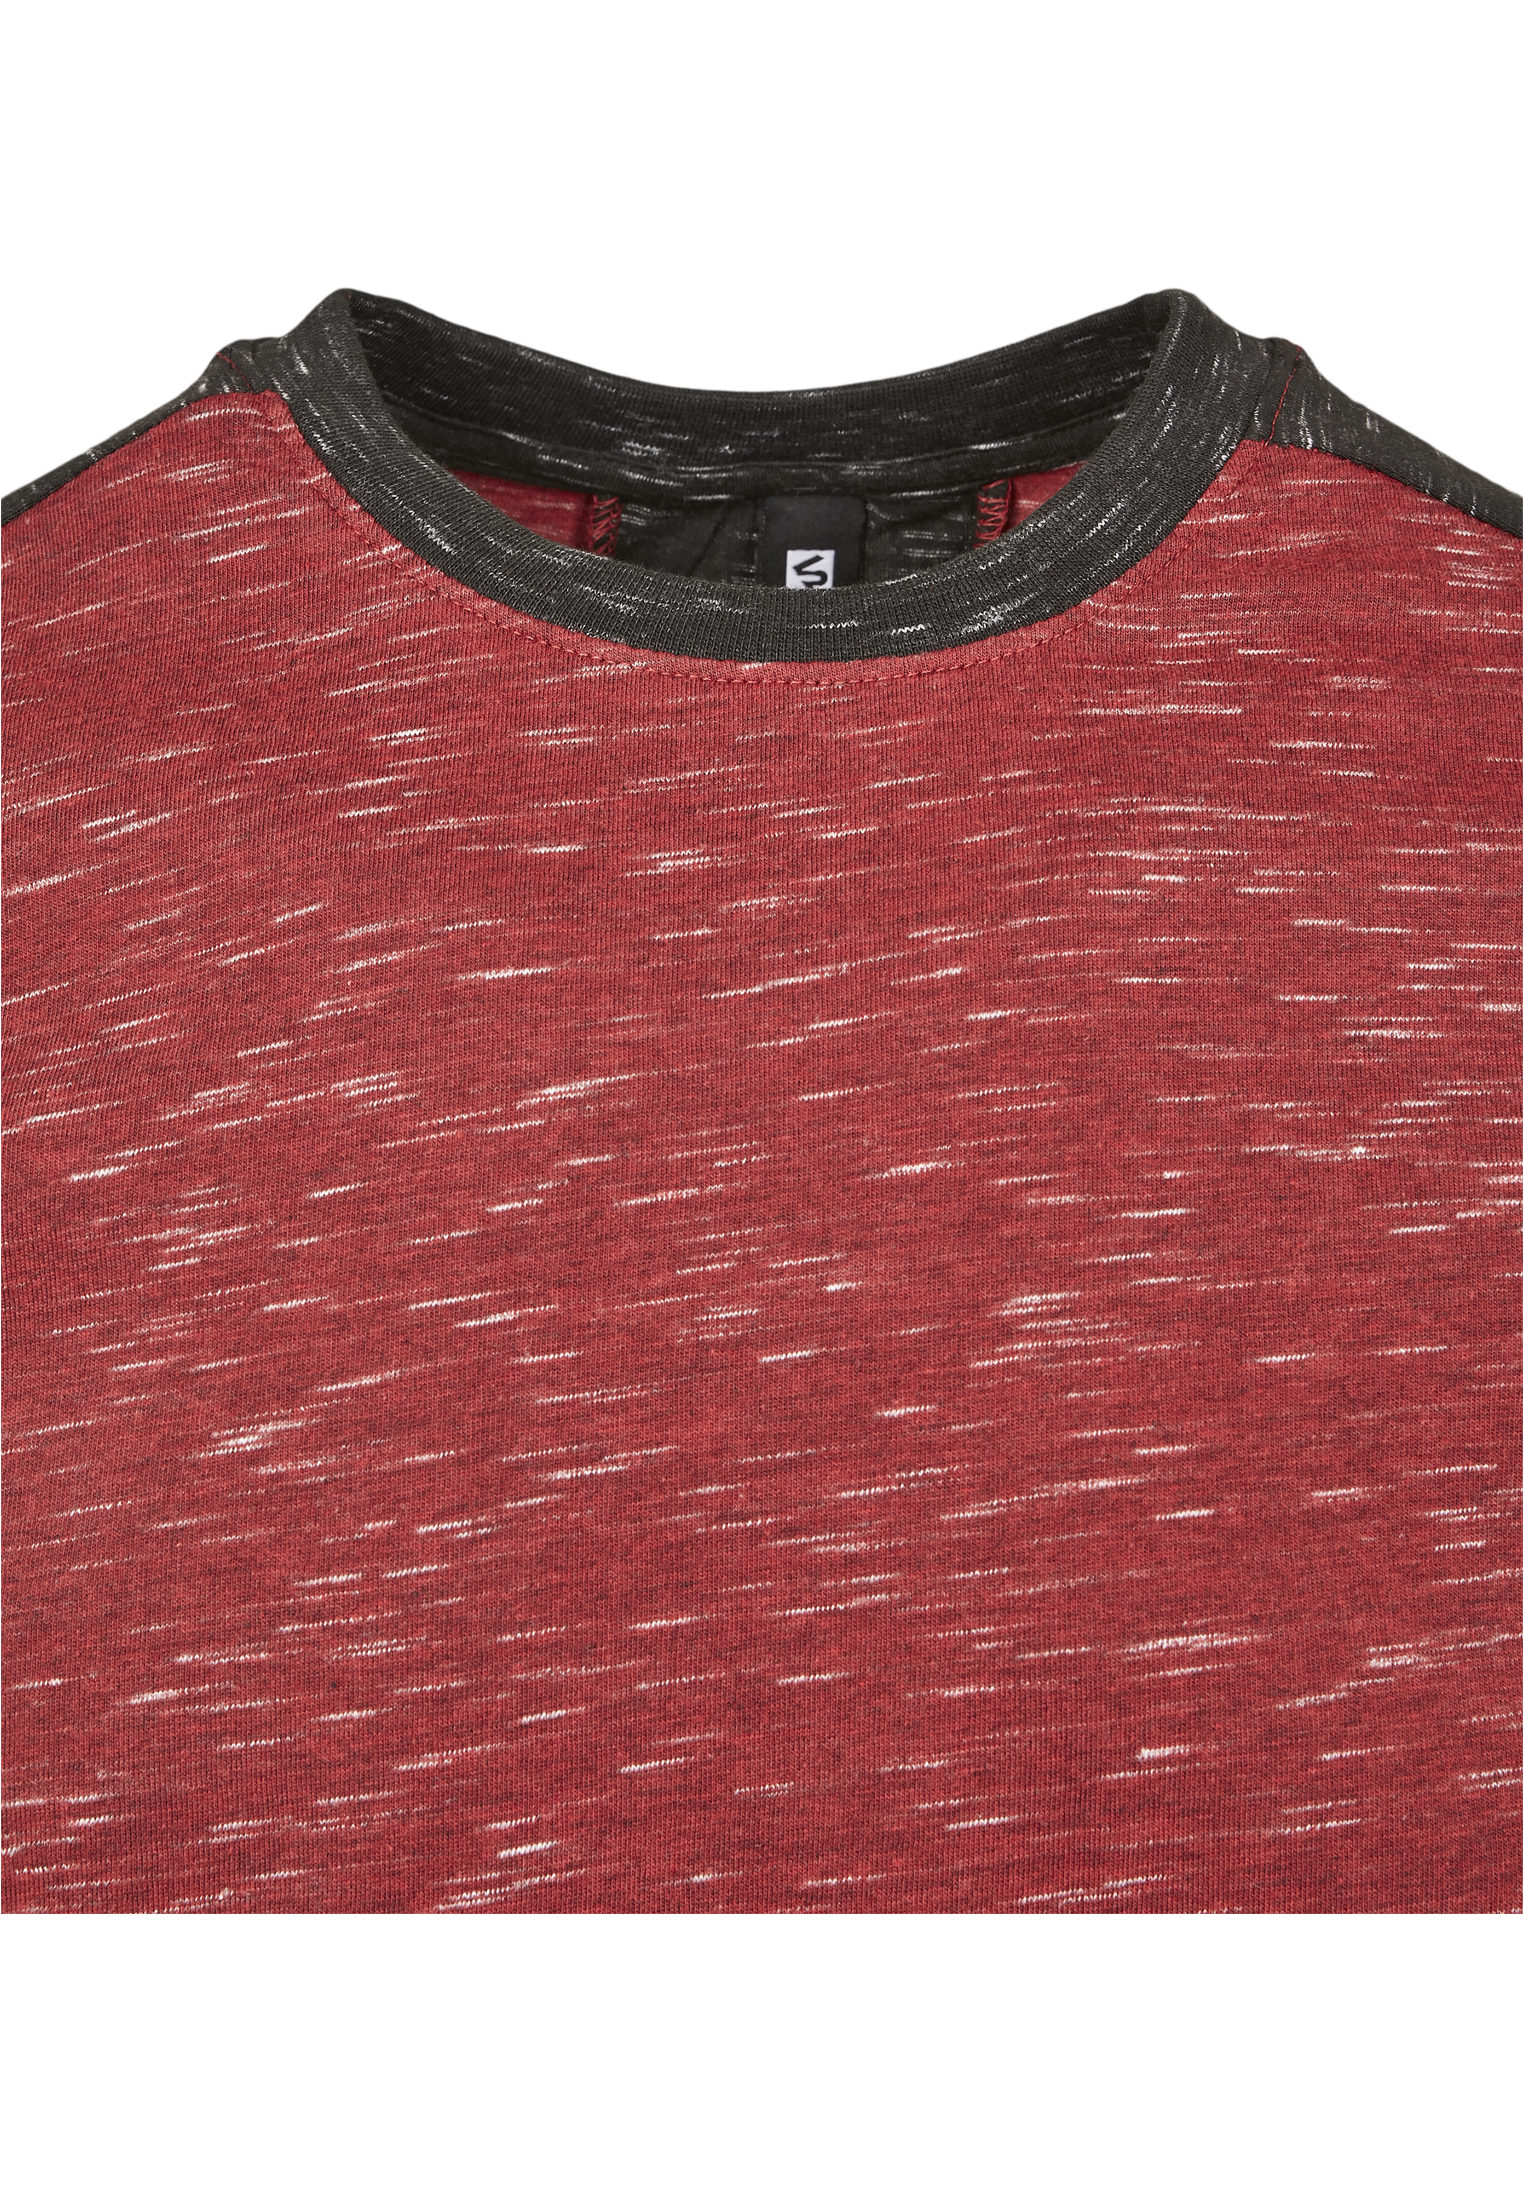 Southpole Shoulder Panel Tech Tee in Farbe marled red